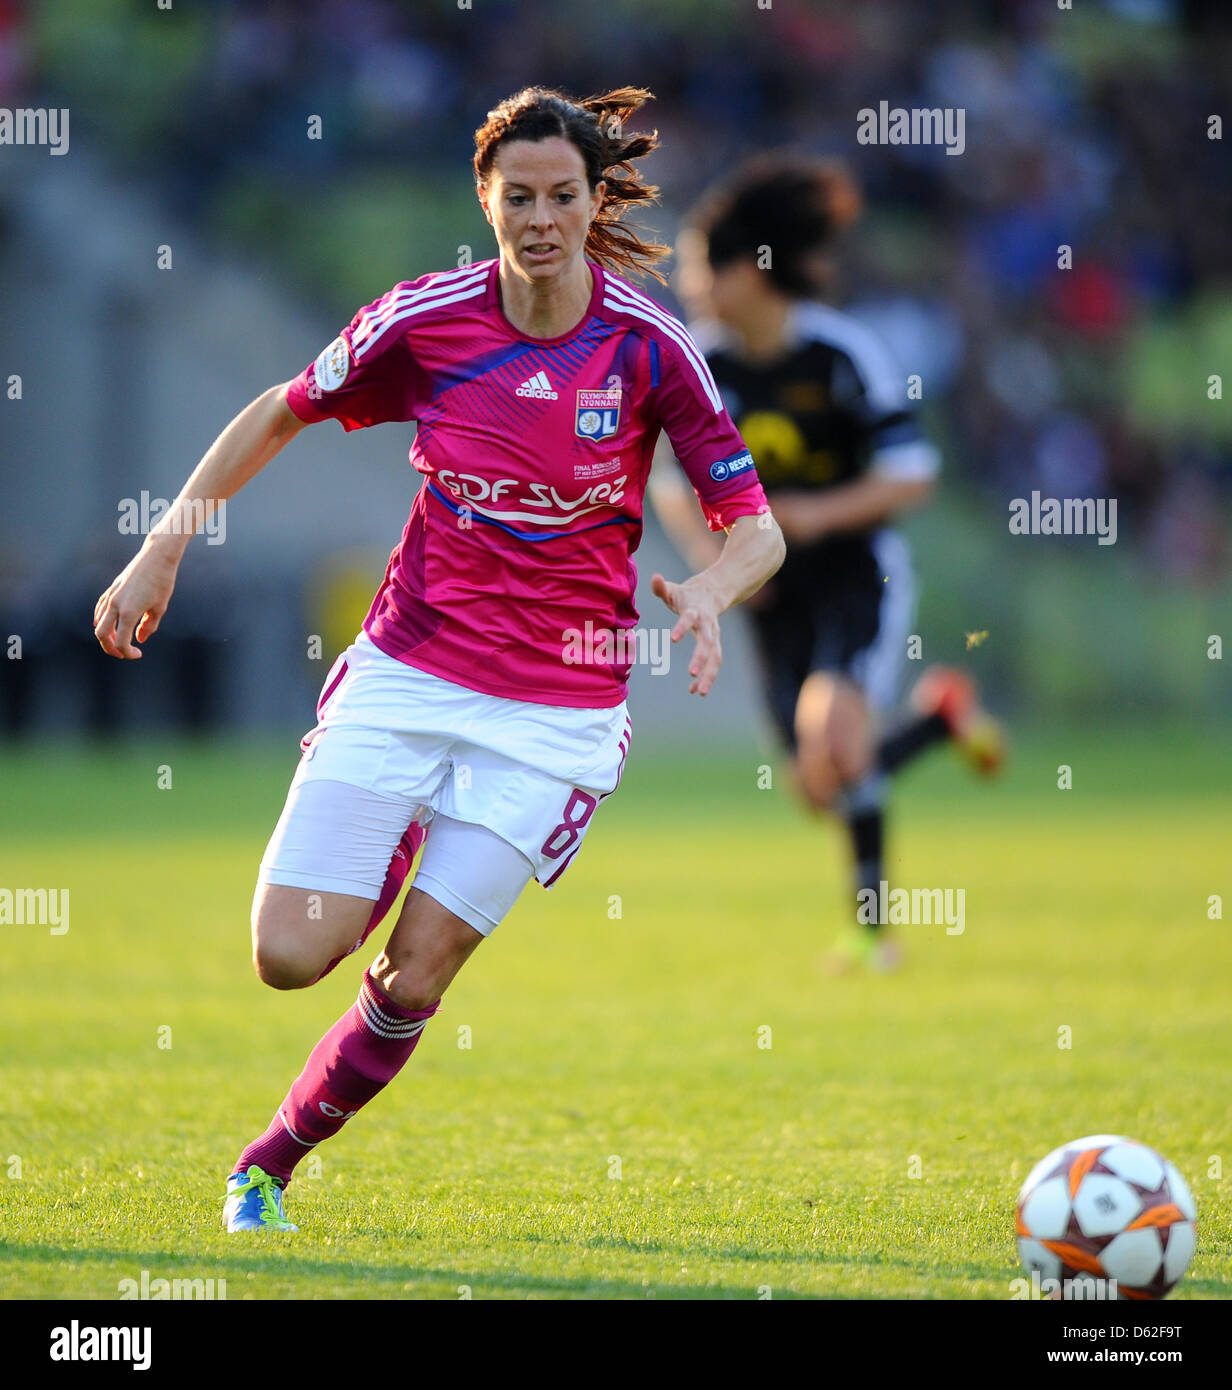 Lyon's Lotta Schelin controls the ball during the UEFA Champions League women's final between Olympique Lyon and 1. FFC Frankfurt at Olympic Stadium in Munich, Germany, 17 May 2012. Photo: Thomas Eisenhuth Stock Photo